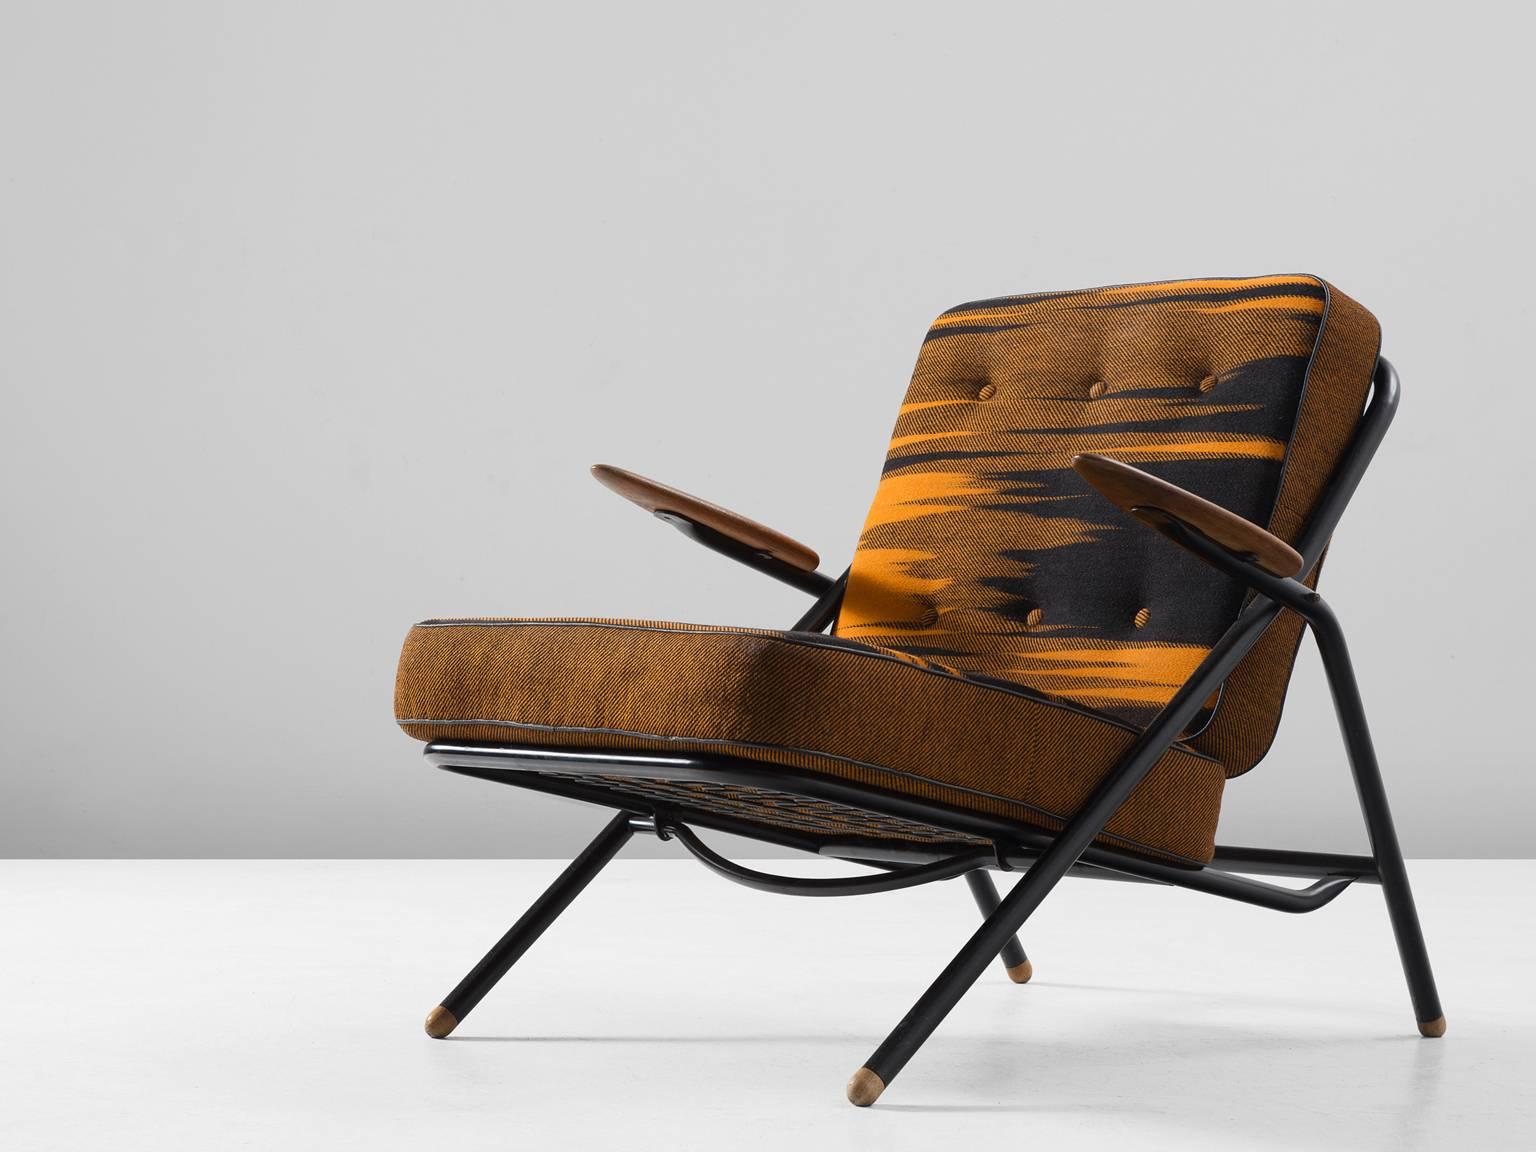 Sawbuck chair GE215 by Hans J. Wegner, 1955 in original upholstery.

Iconic 'W' Sawbuck chair by Danish designer Hans Wegner. This chair was shown at the 1955 great Nordic design exhibition in Helsingborg, Sweden. In this Wegner combined diverse